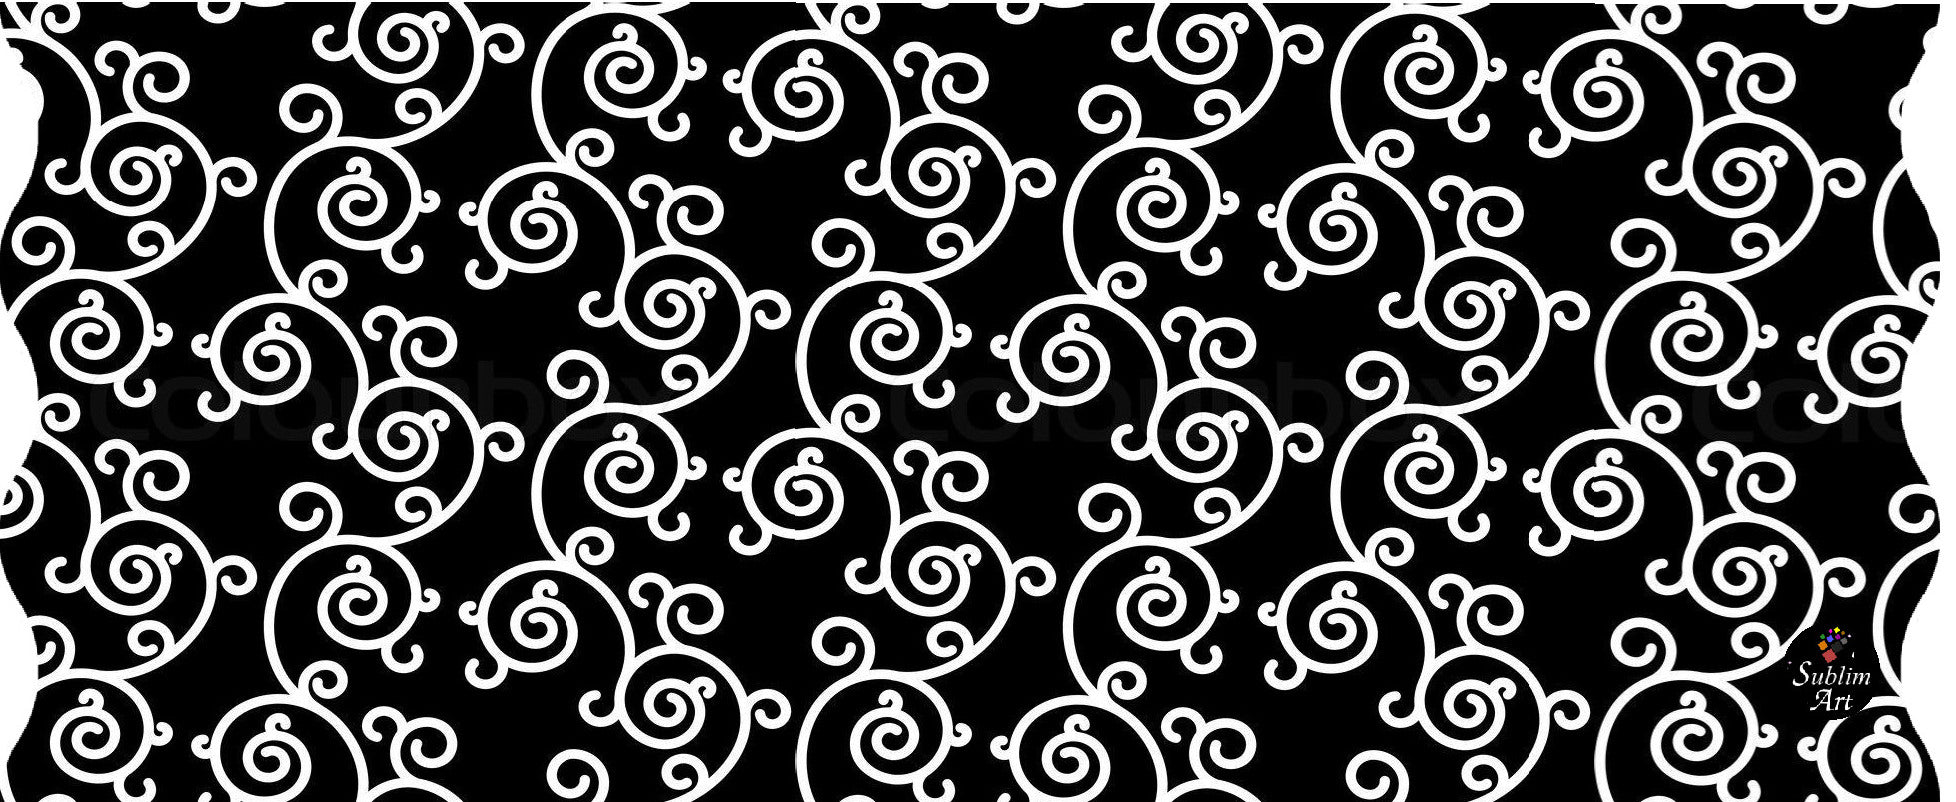 SUBLIMART: B&W Beauty  - Mug featuring a dramatic swirl design in black and white - Artistica.com